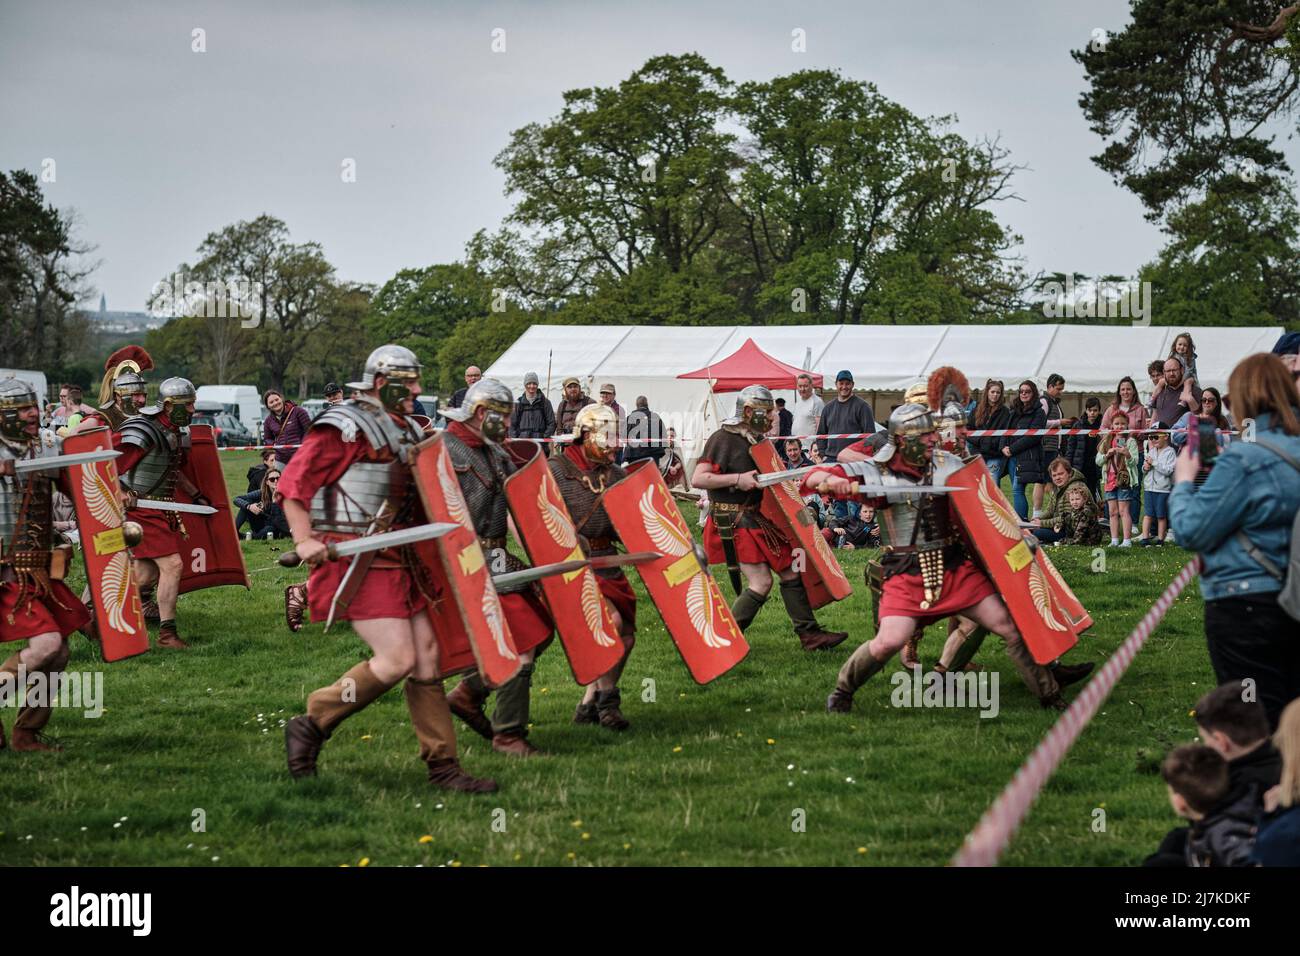 Roman legionaries of the Legion VIII charge spectators in the arena at the No Man's Land Event at Bodrhyddan Hall, Wales Stock Photo